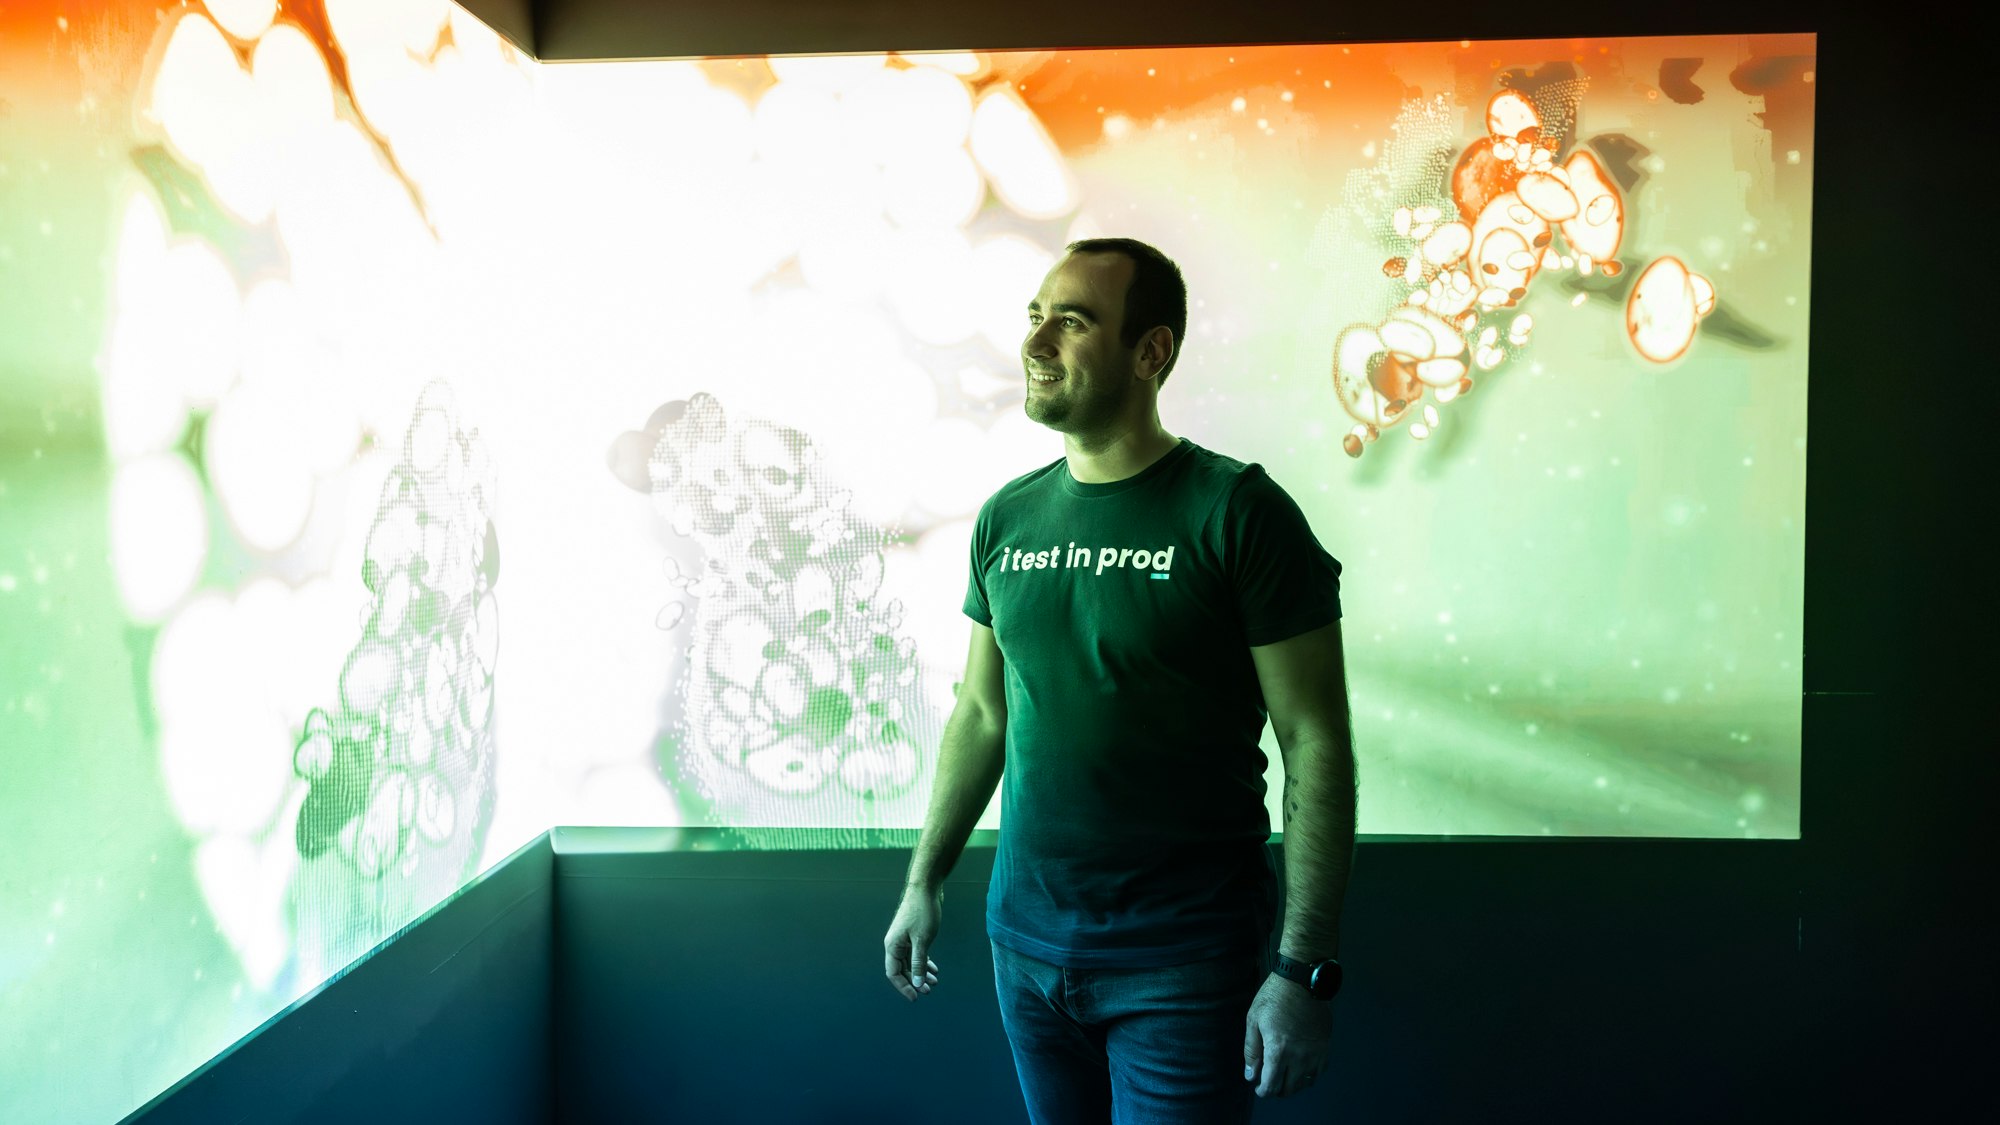 A man in a shirt saying "I test in prod", standing in front of a screen projection